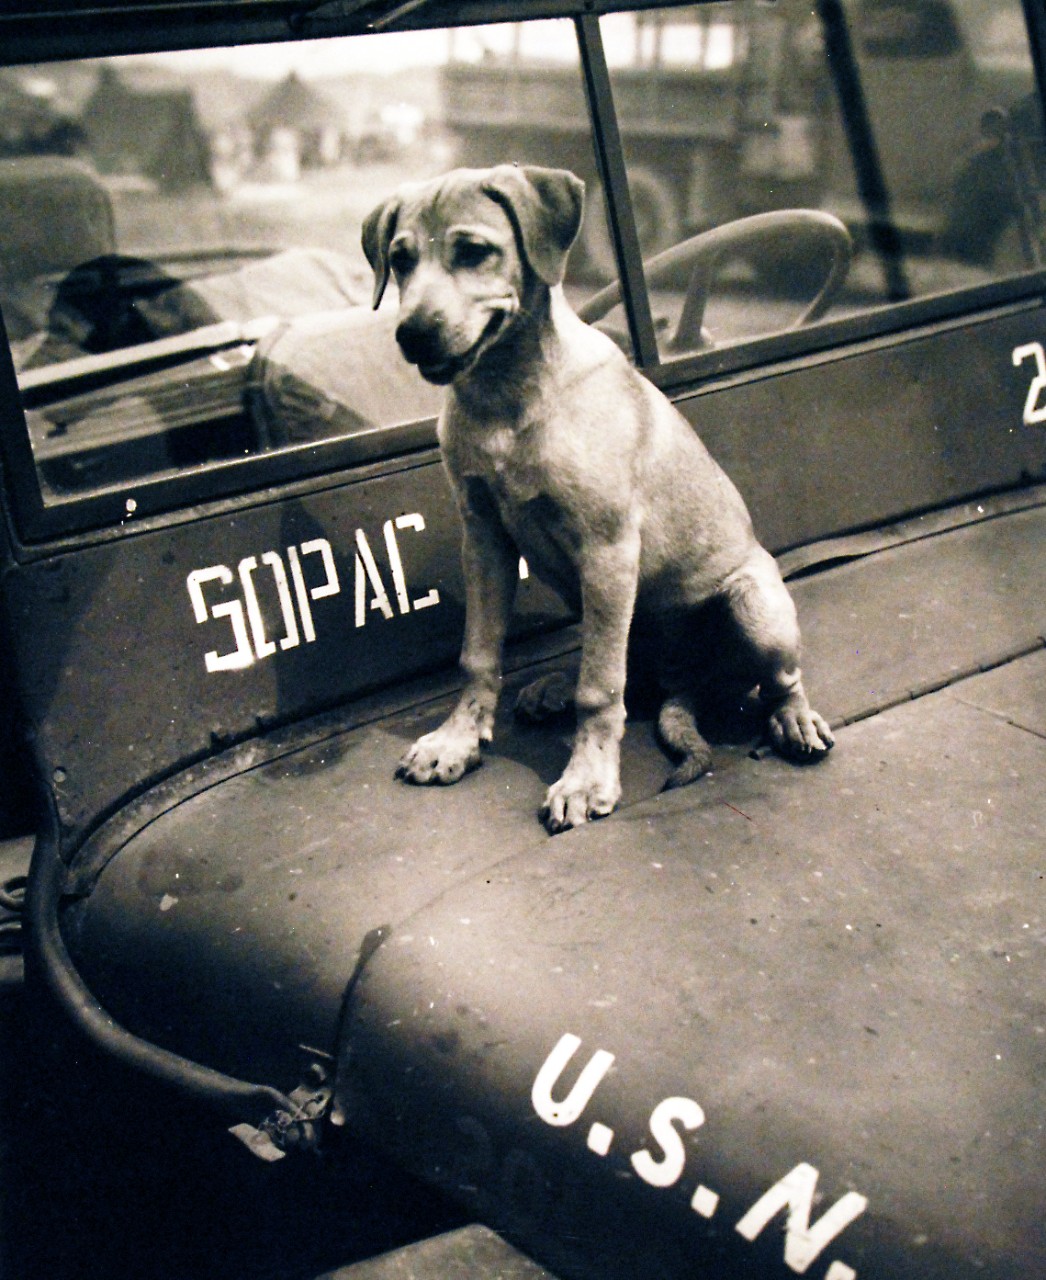 80-G-54609: Guadalcanal.  Mascot of the Armed Forces “Jeep” on Guadalcanal poses atop a U.S. Navy jeep.   Photograph released September 29, 1943.  U.S. Navy Photograph, now in the collections of the National Archives.  (2016/11/25).